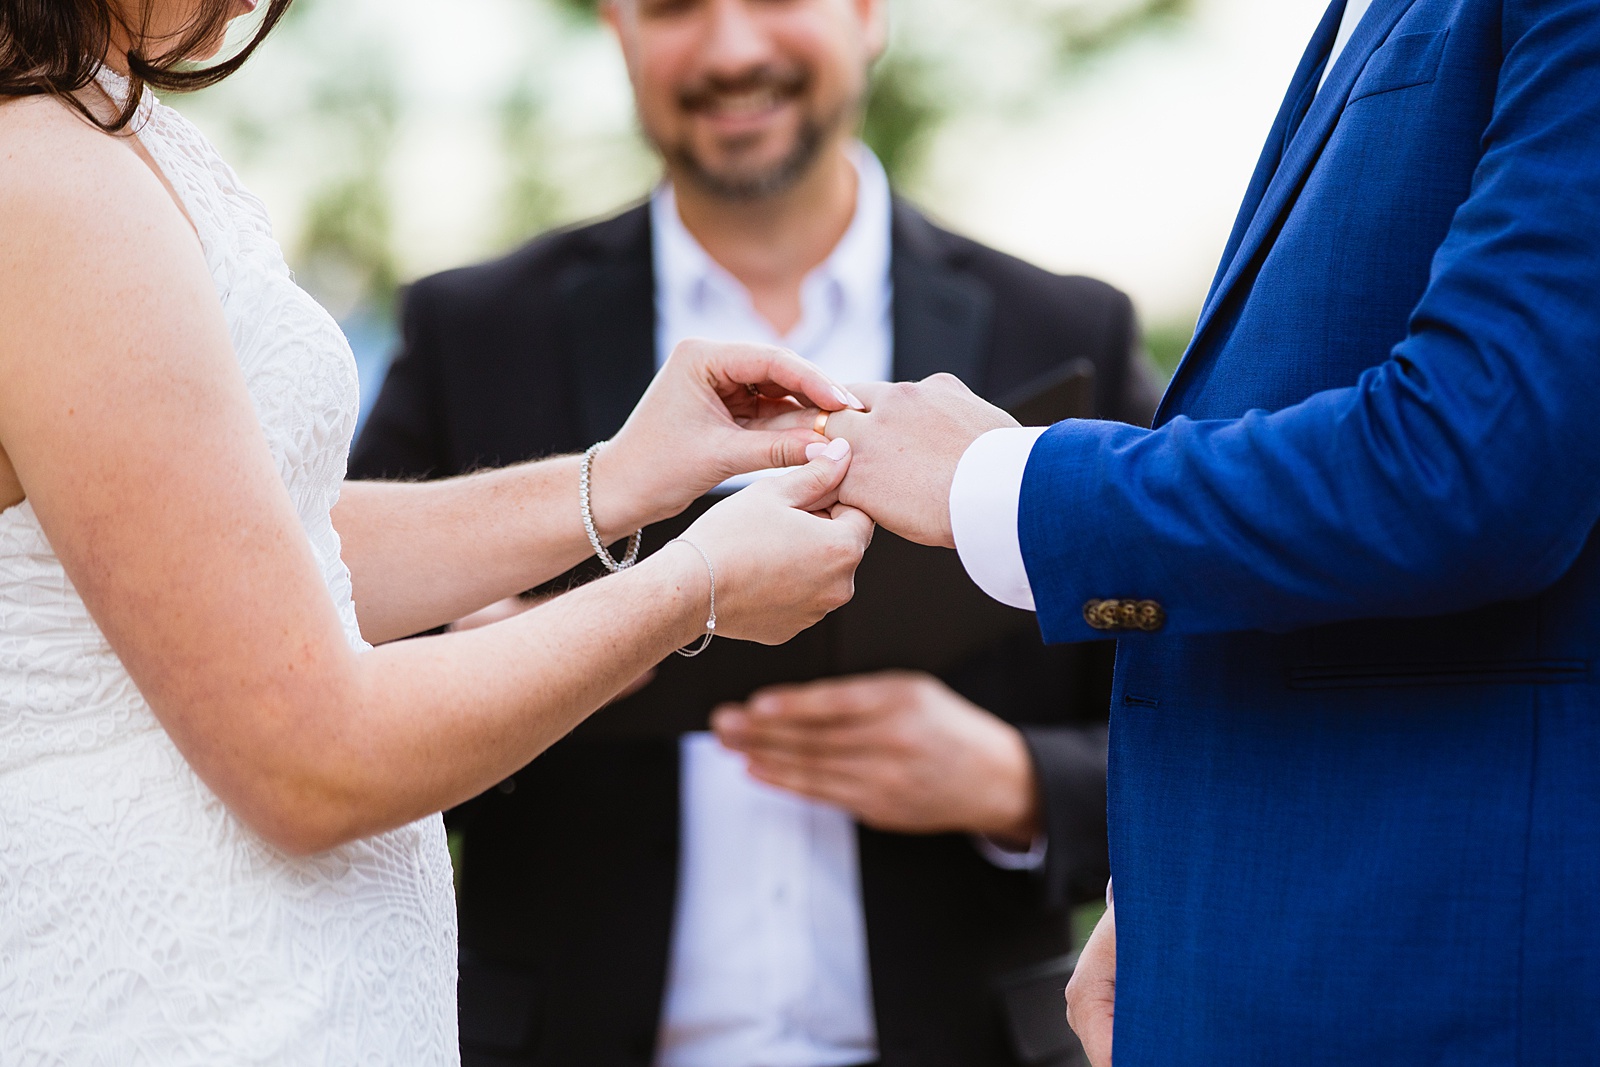 Bride & Groom exchange rings during their wedding ceremony at Mogollon Rim by Arizona elopement photographer Juniper and Co Photography.